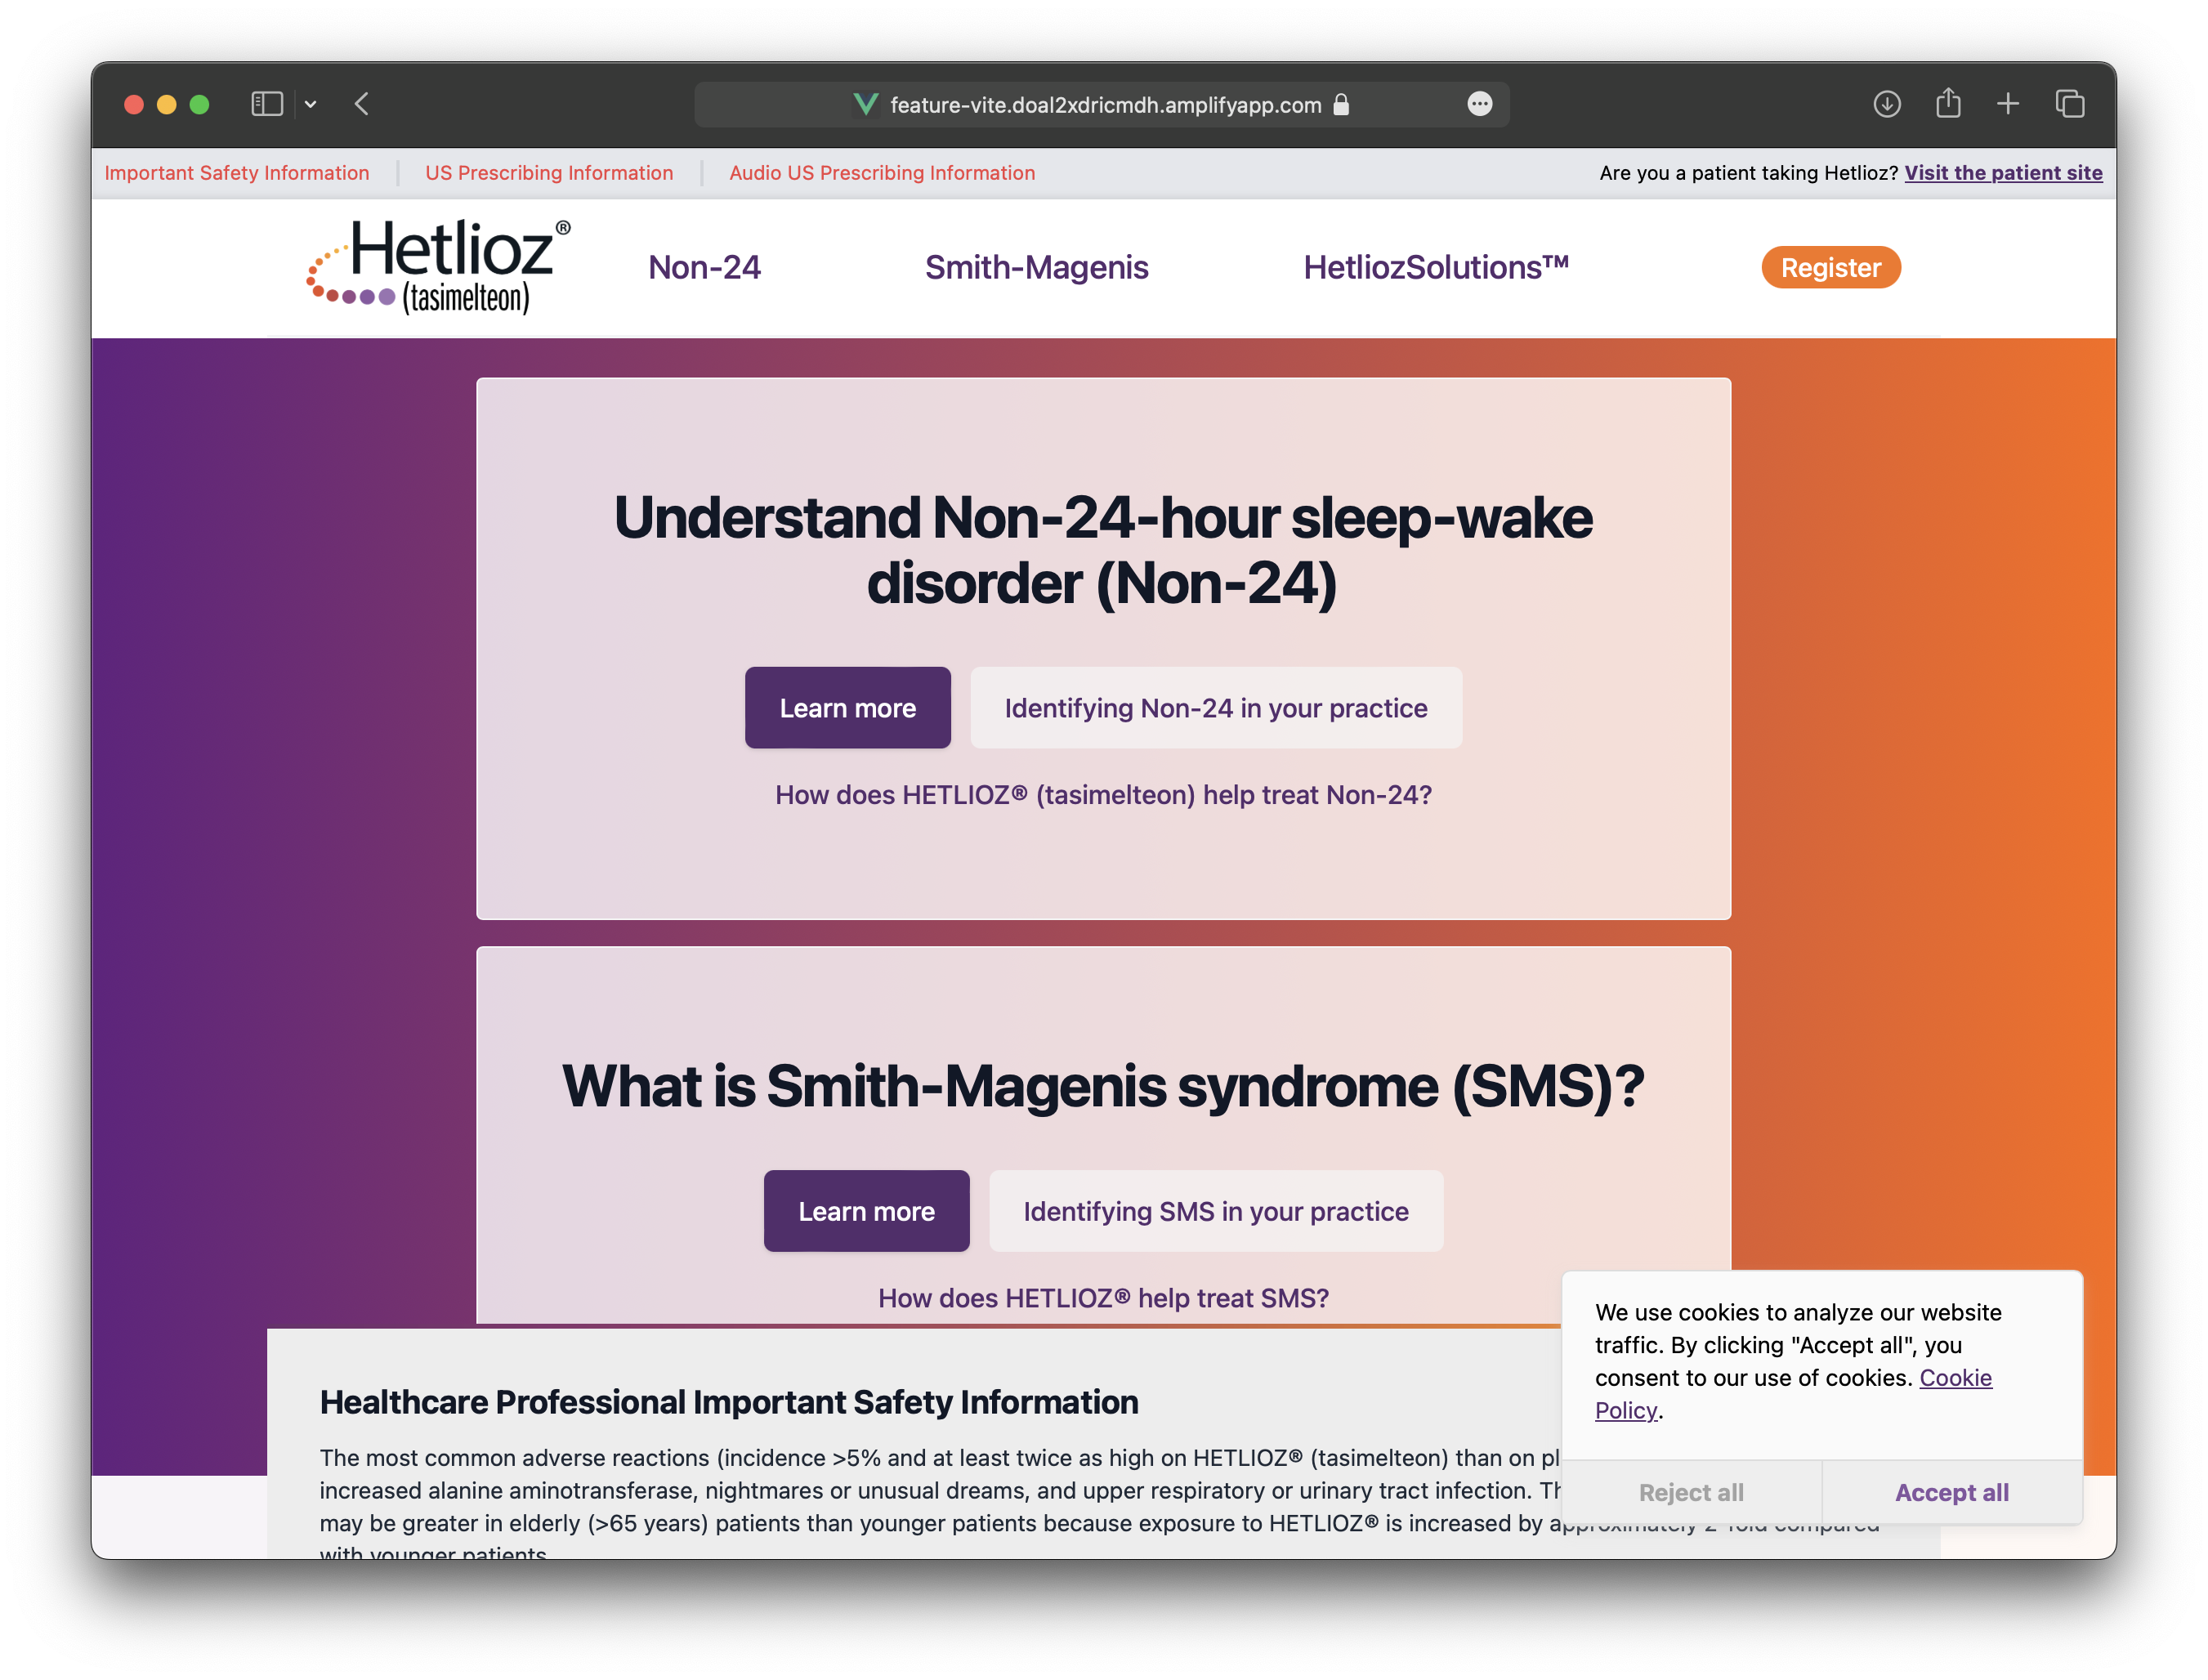 New HetliozPro.com homepage with modernized design, clear calls to action, and "cards" grouping the syndromes.